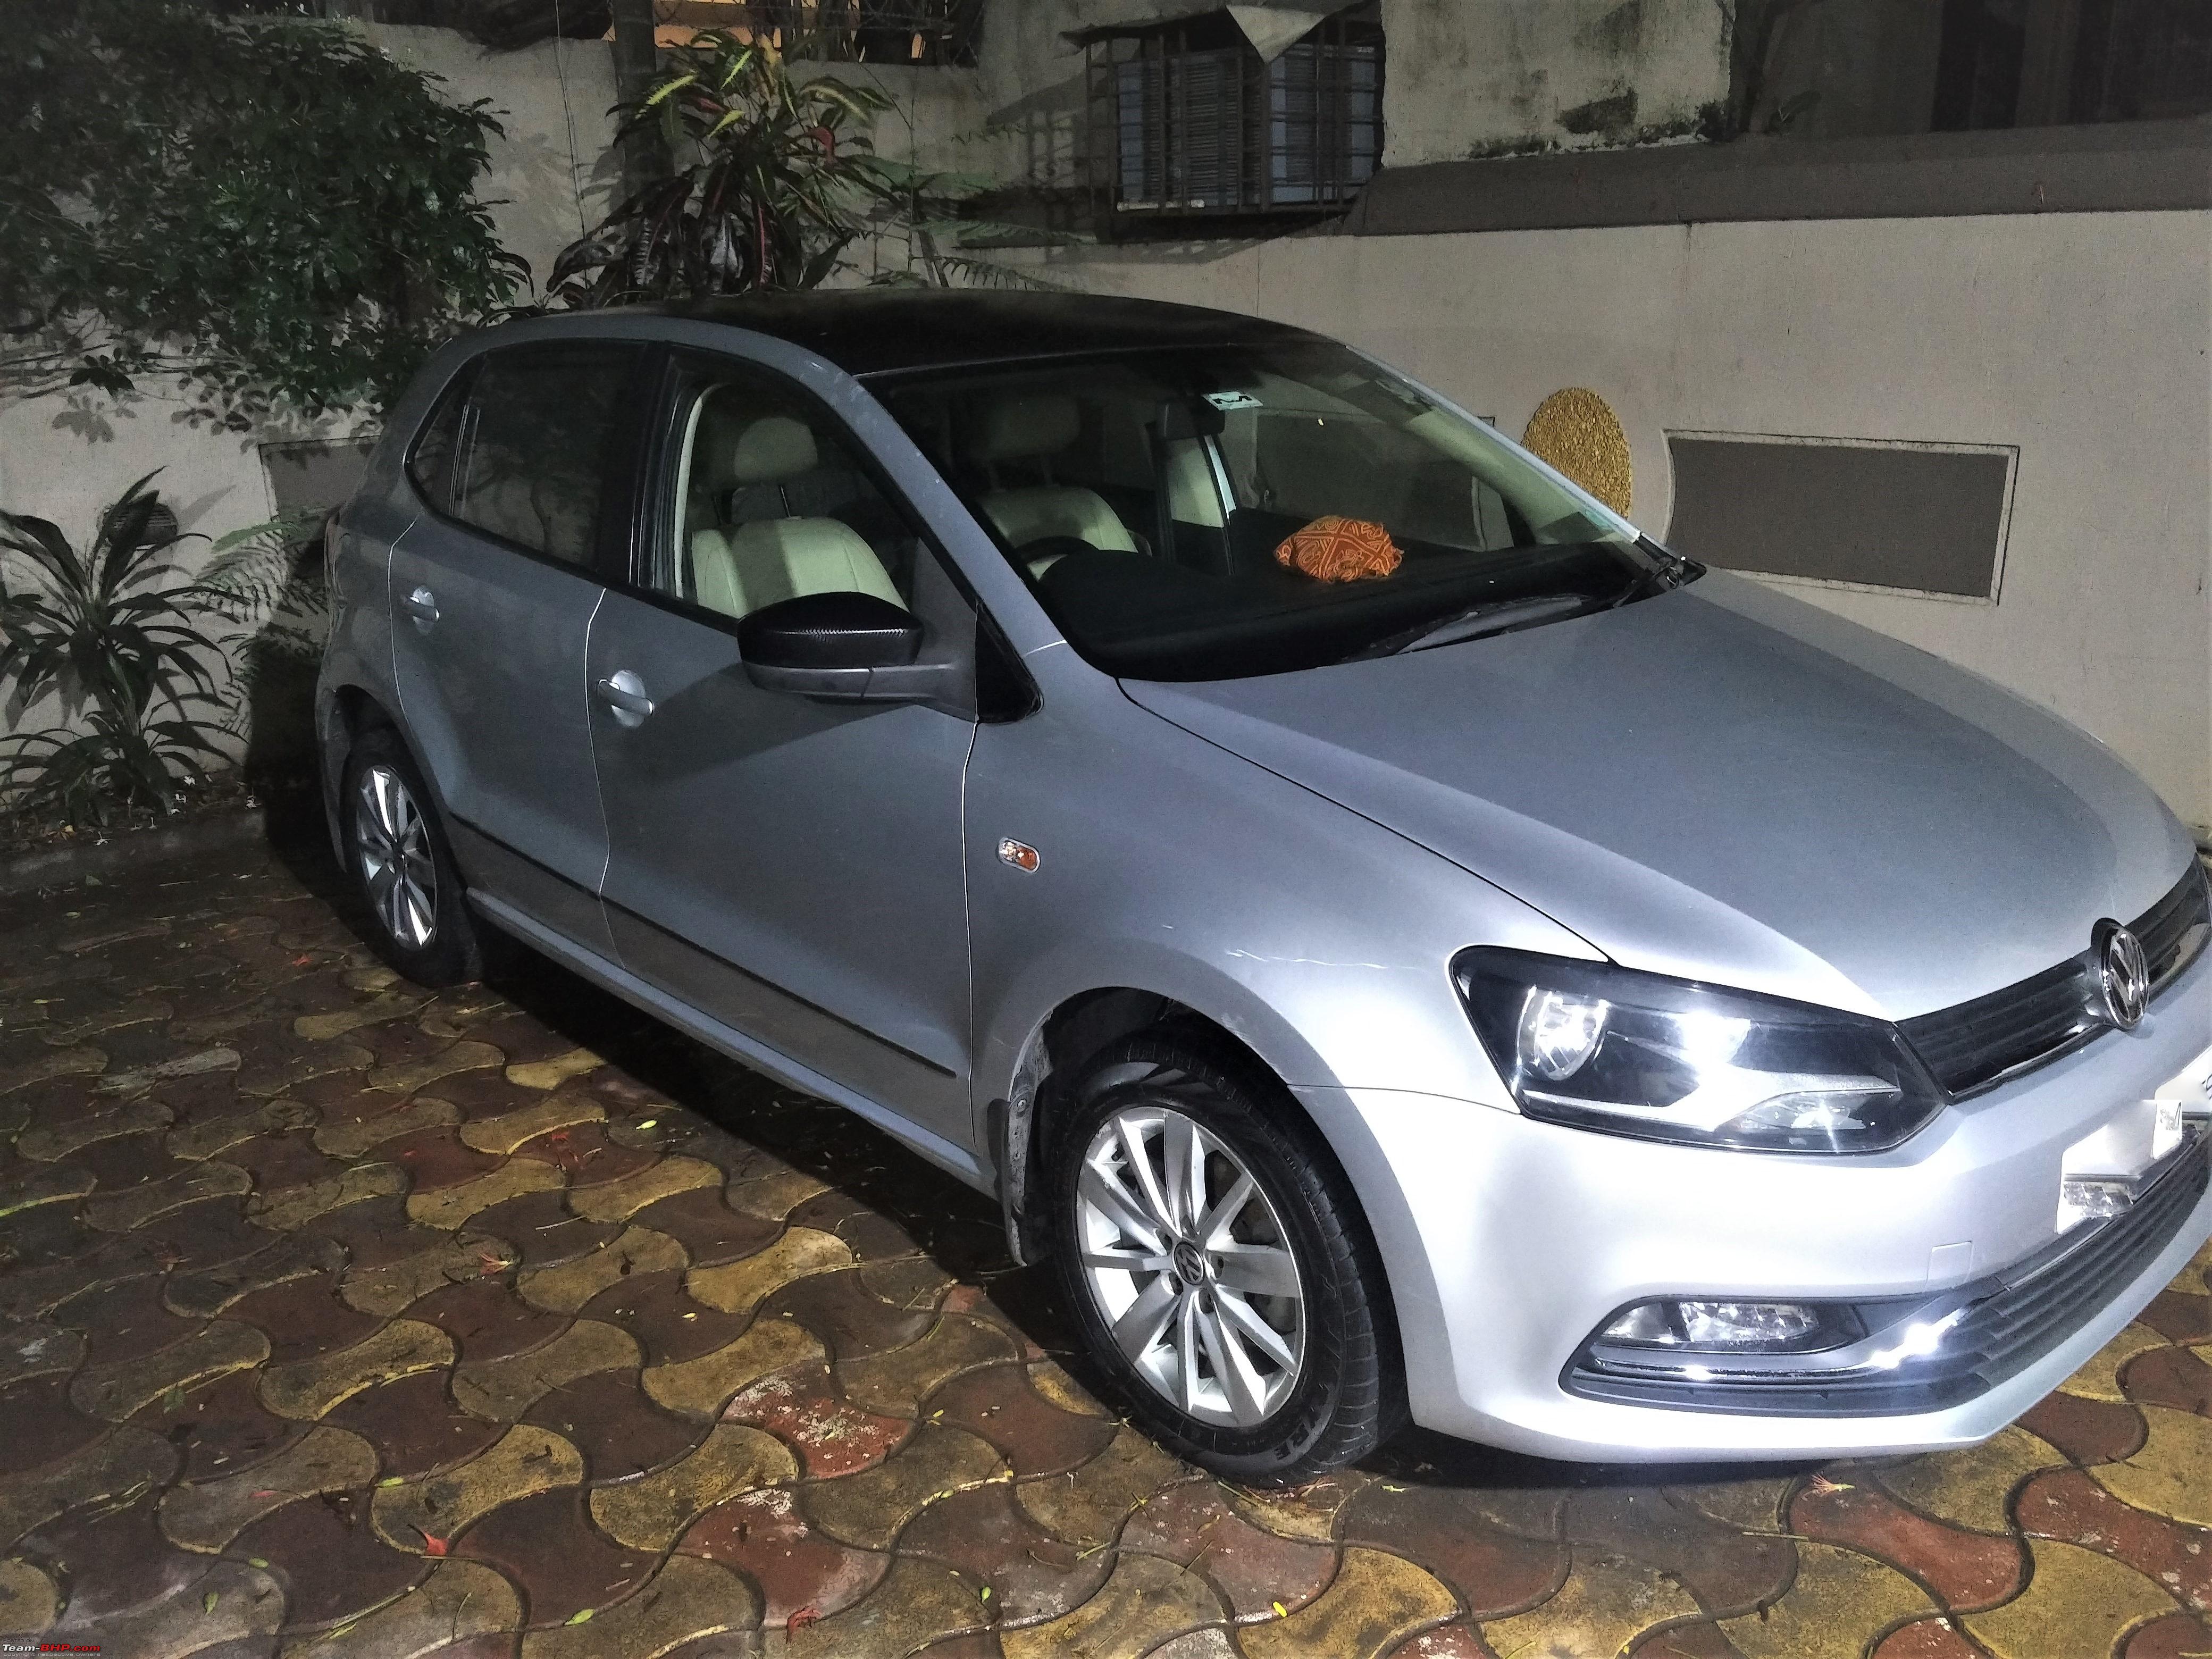 Volkswagen Polo Problems: Common Issues and Repair Costs